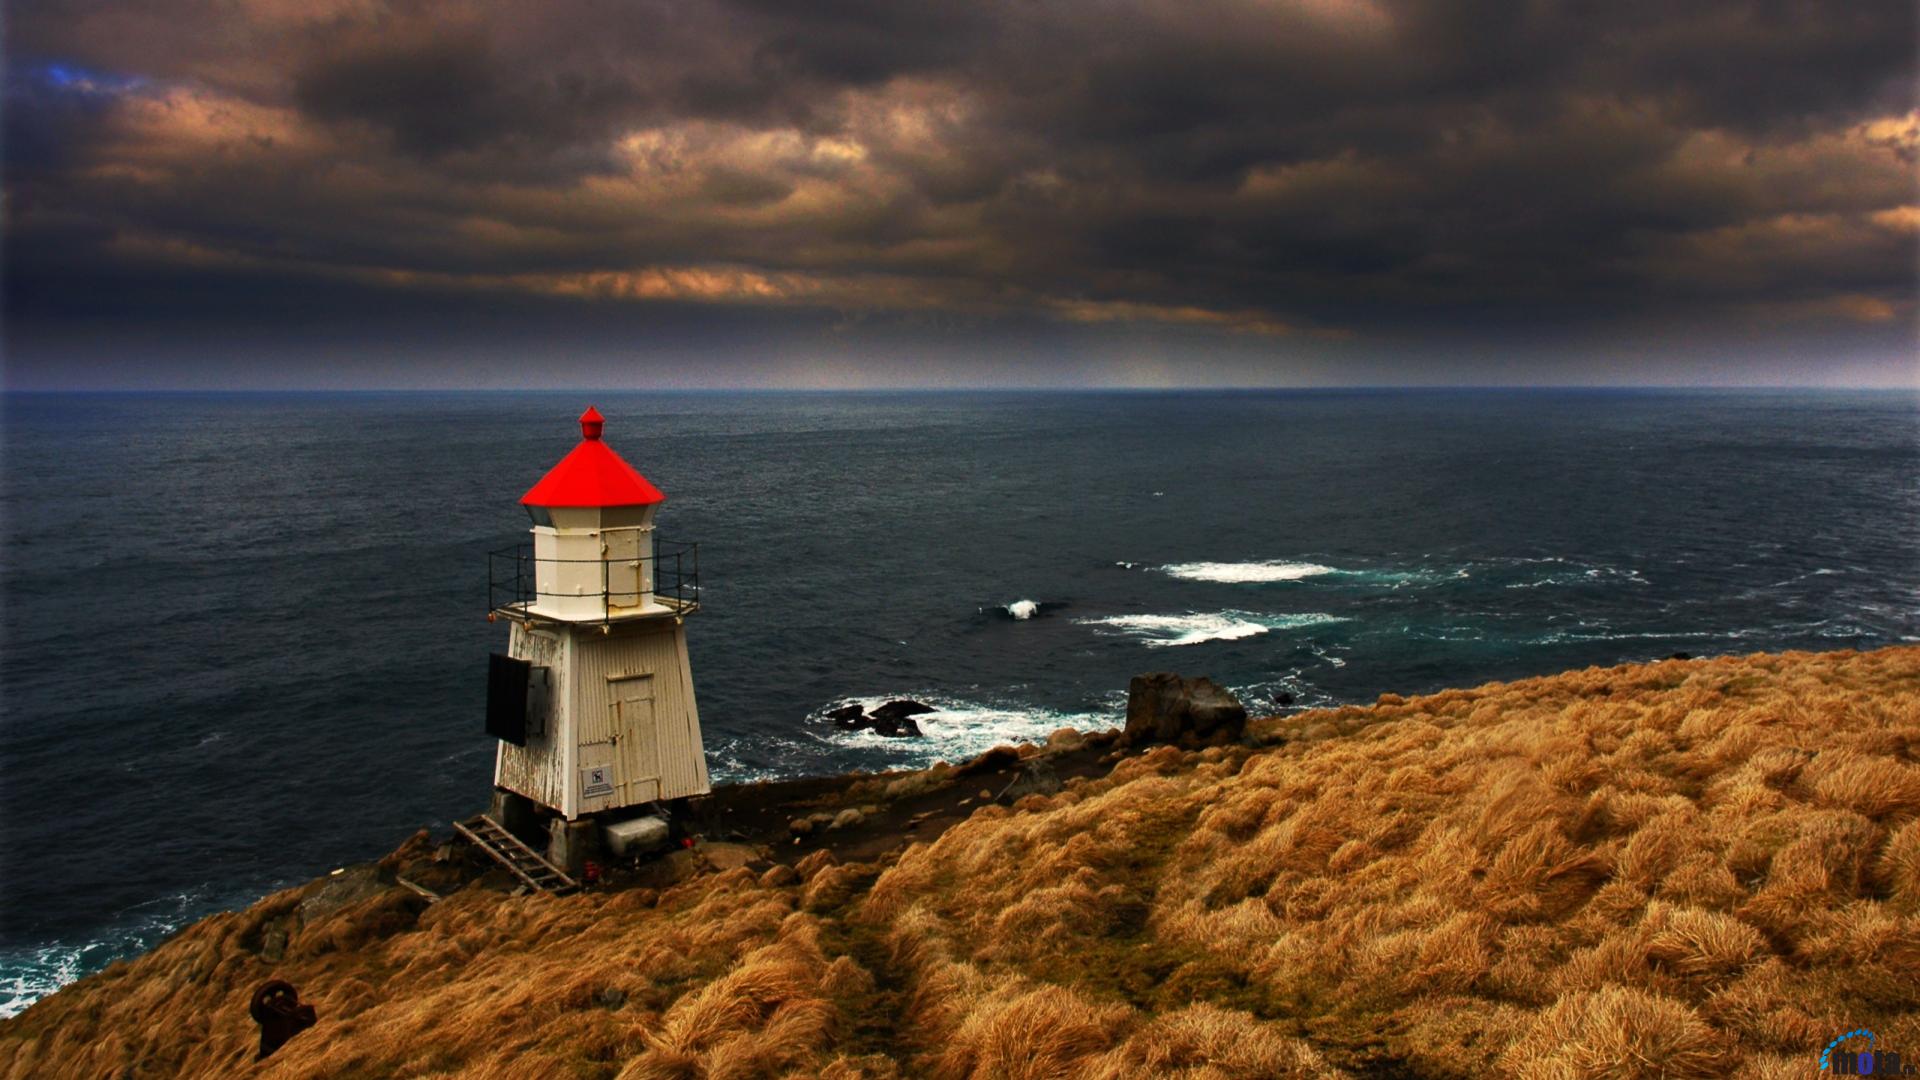 Download Wallpaper Lighthouse in stormy sea (1920 x 1080 HDTV ...